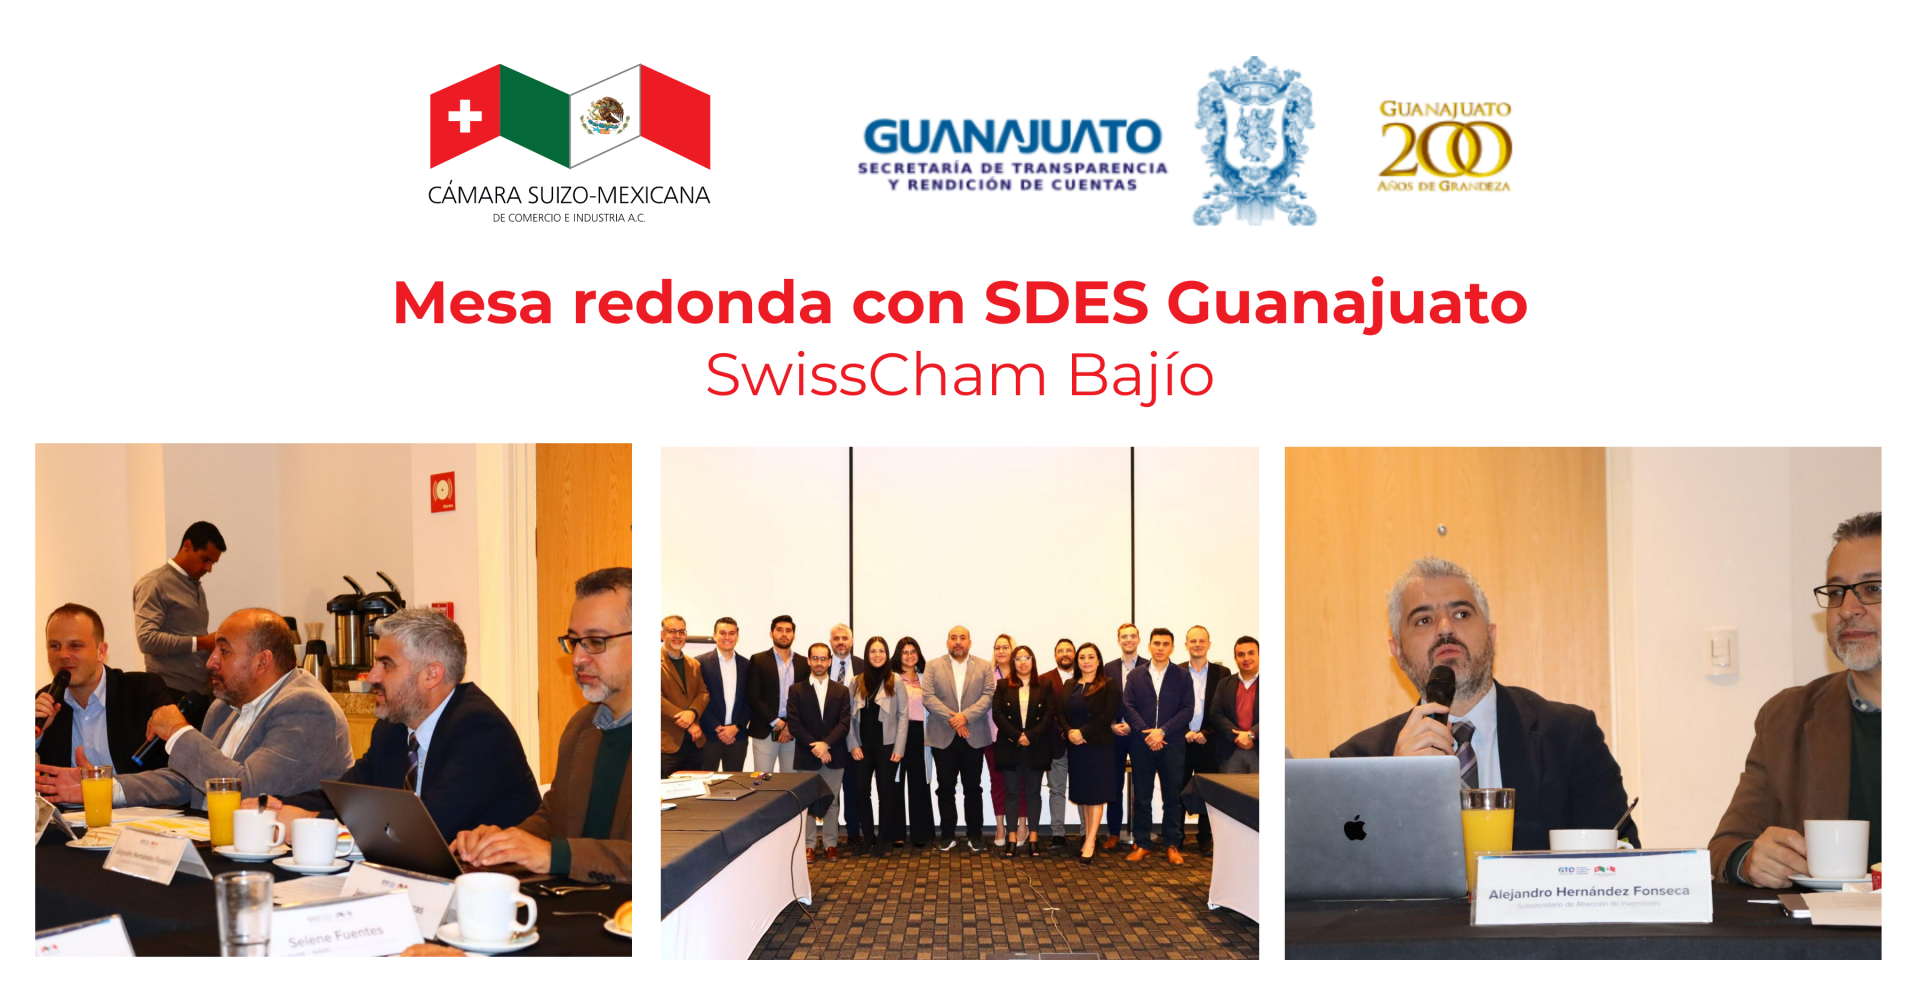 Roundtable with SDES Guanajuato